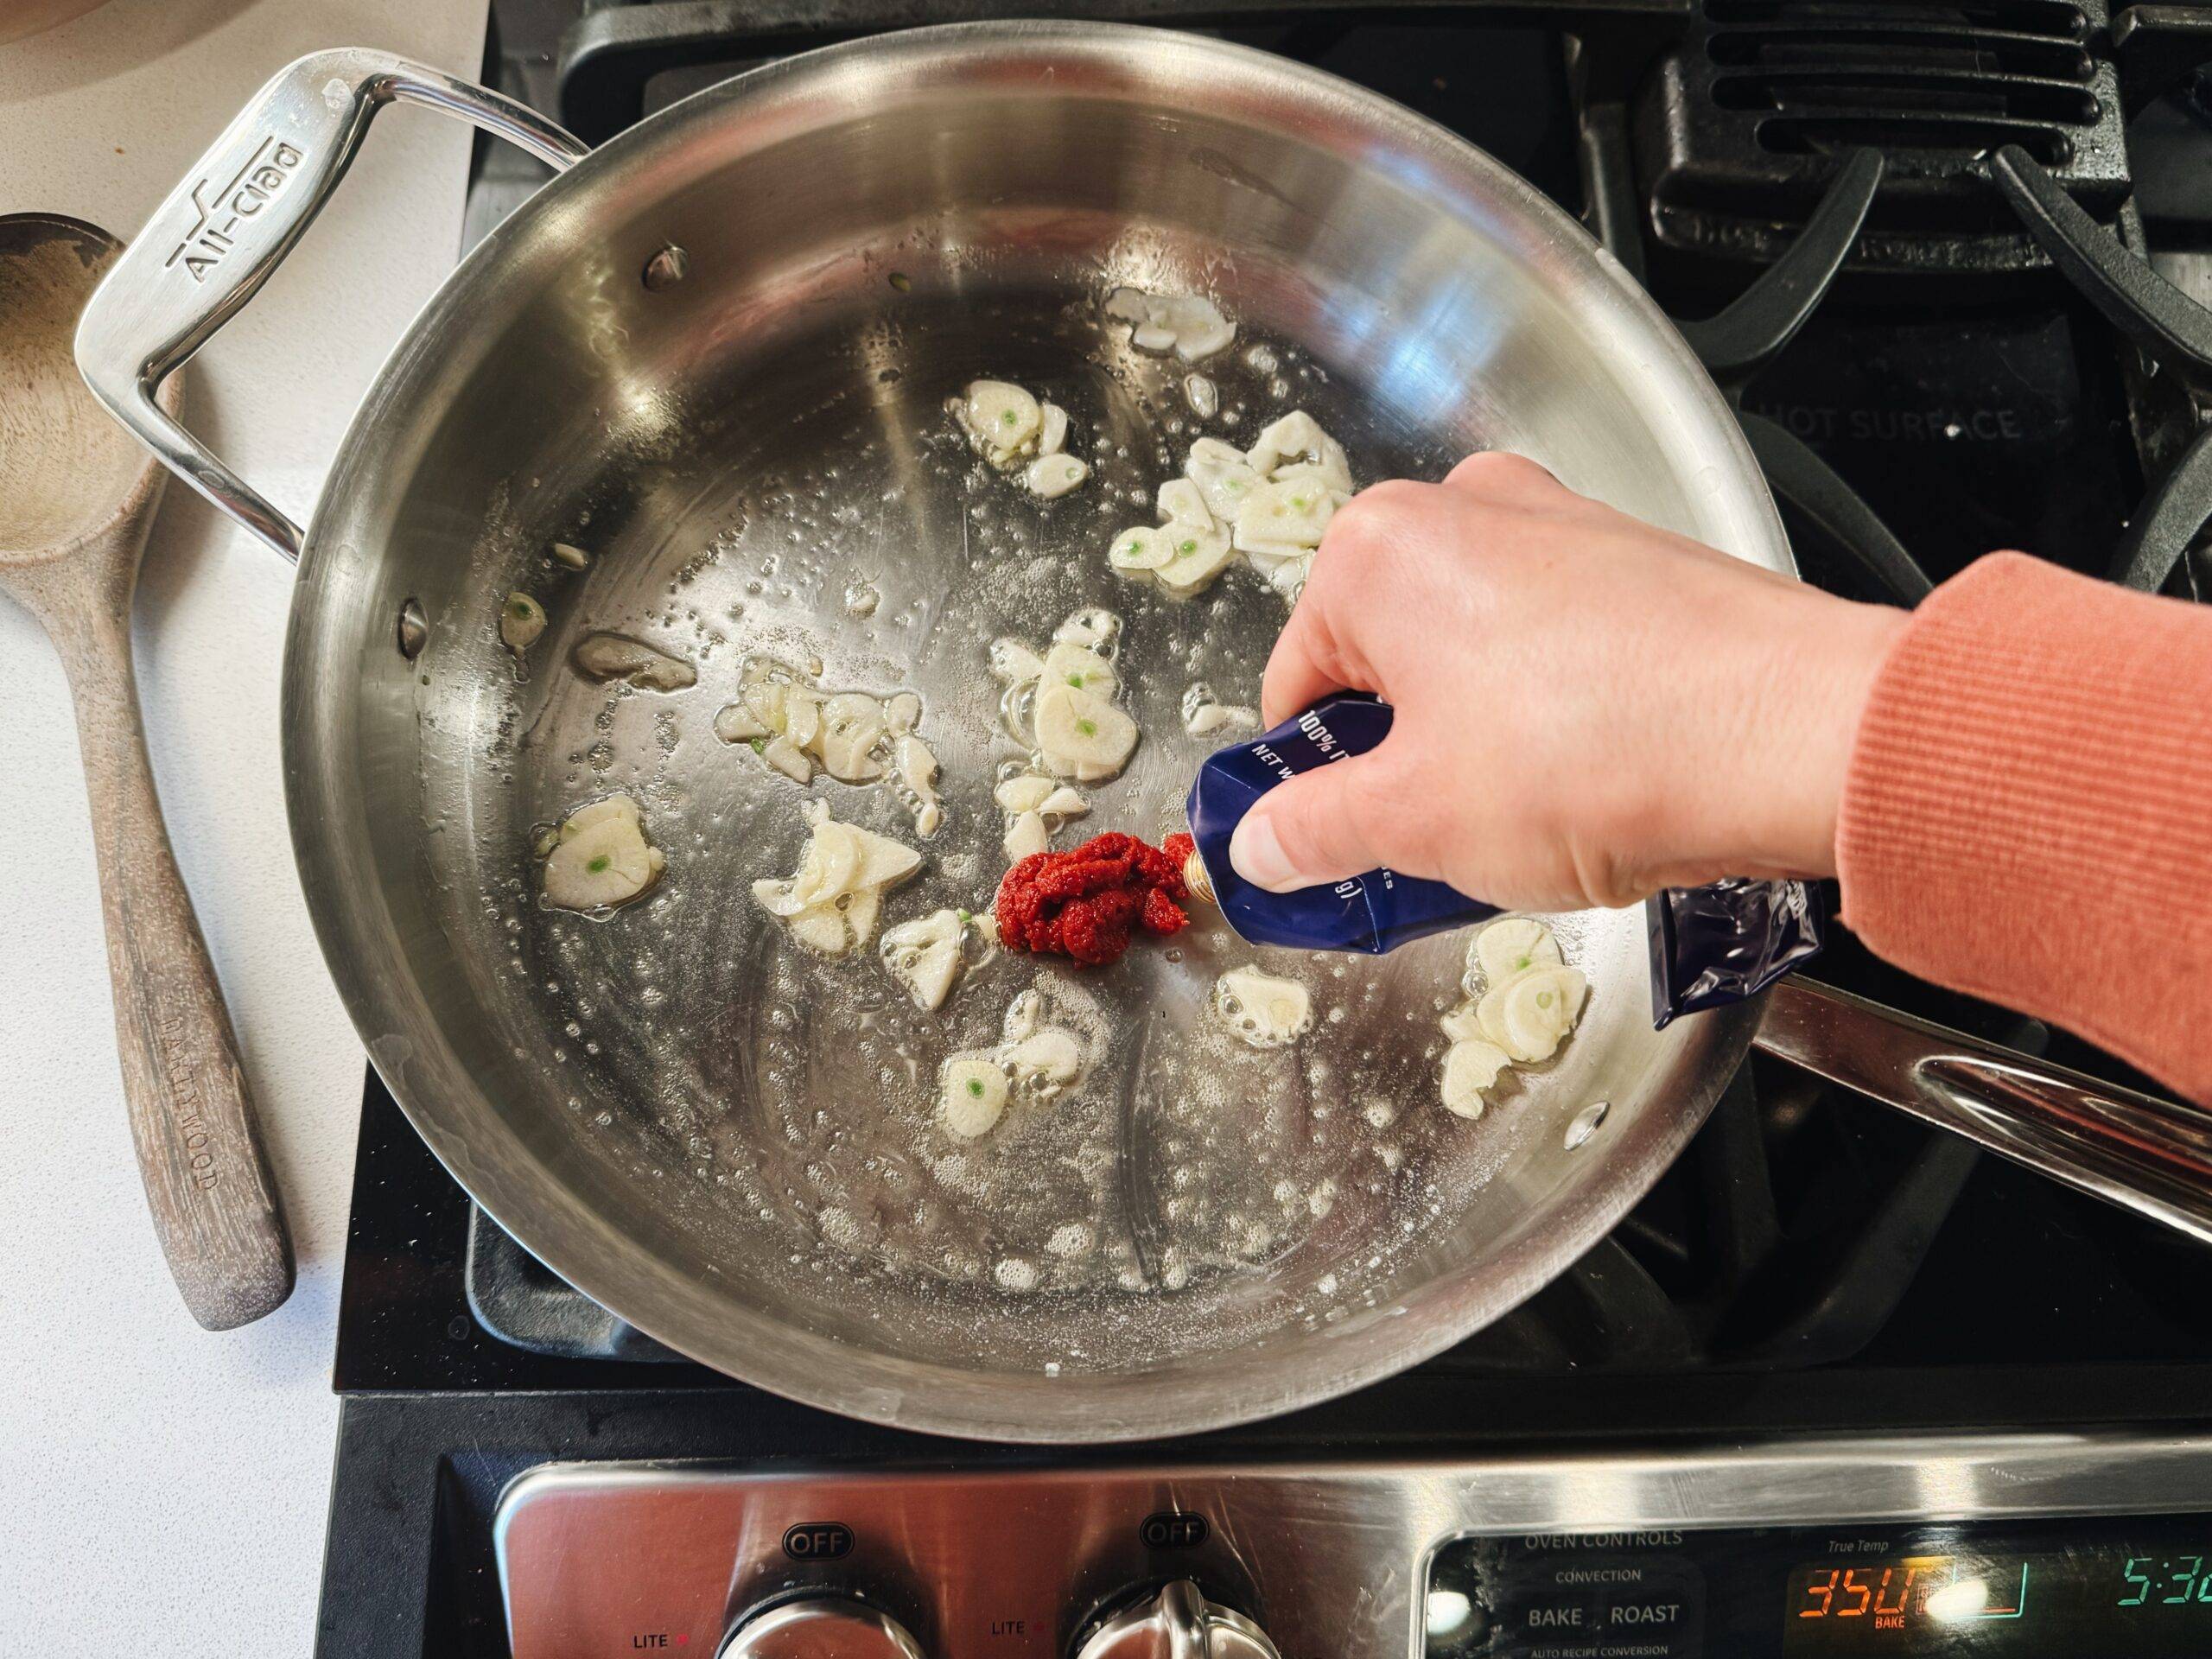 Squeezing tomato paste into a pan with sliced garlic.